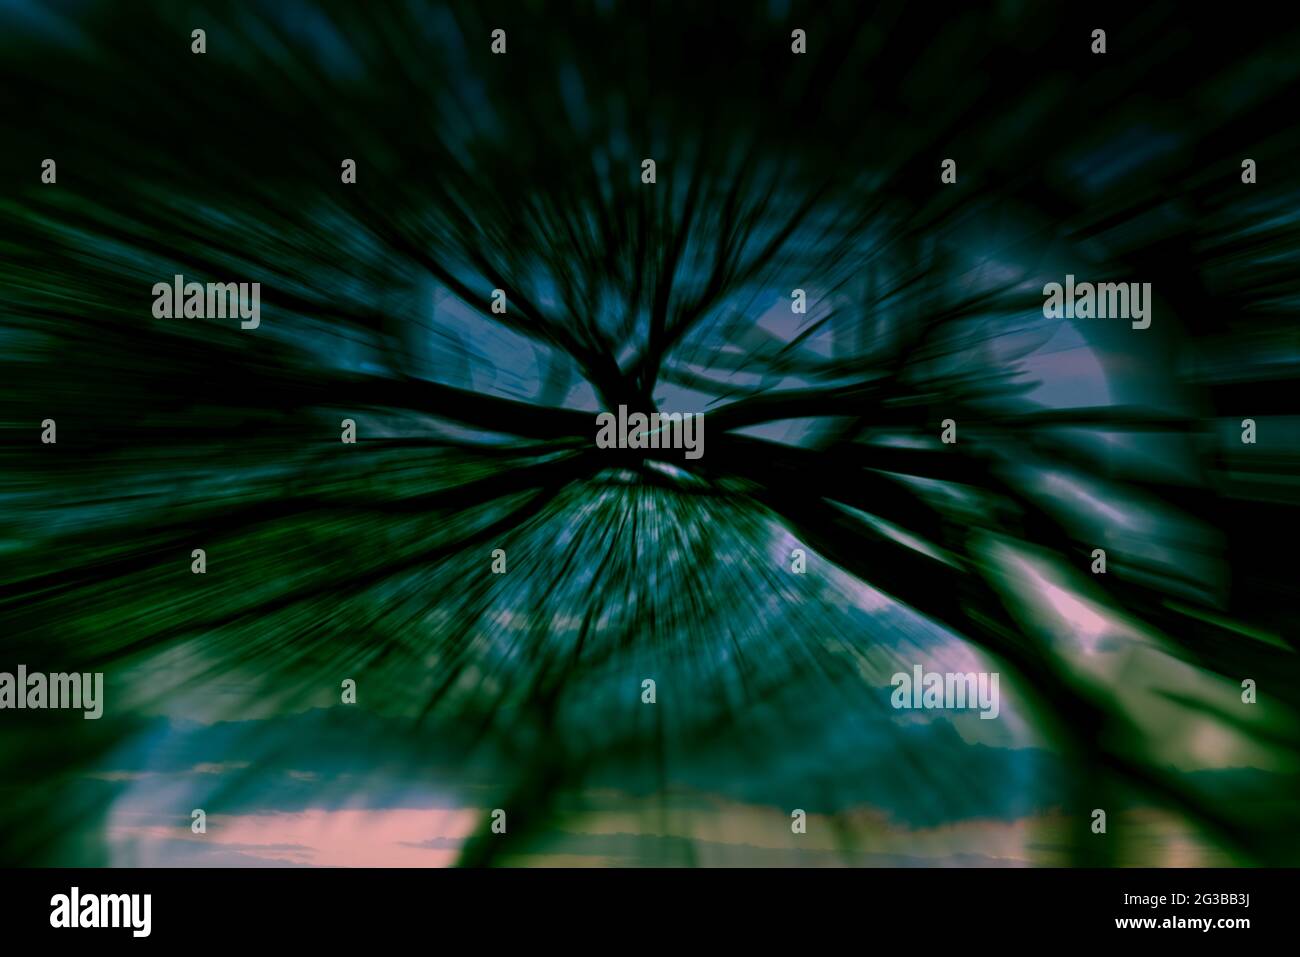 Stone Pine trees manipulated with various effect. Stock Photo